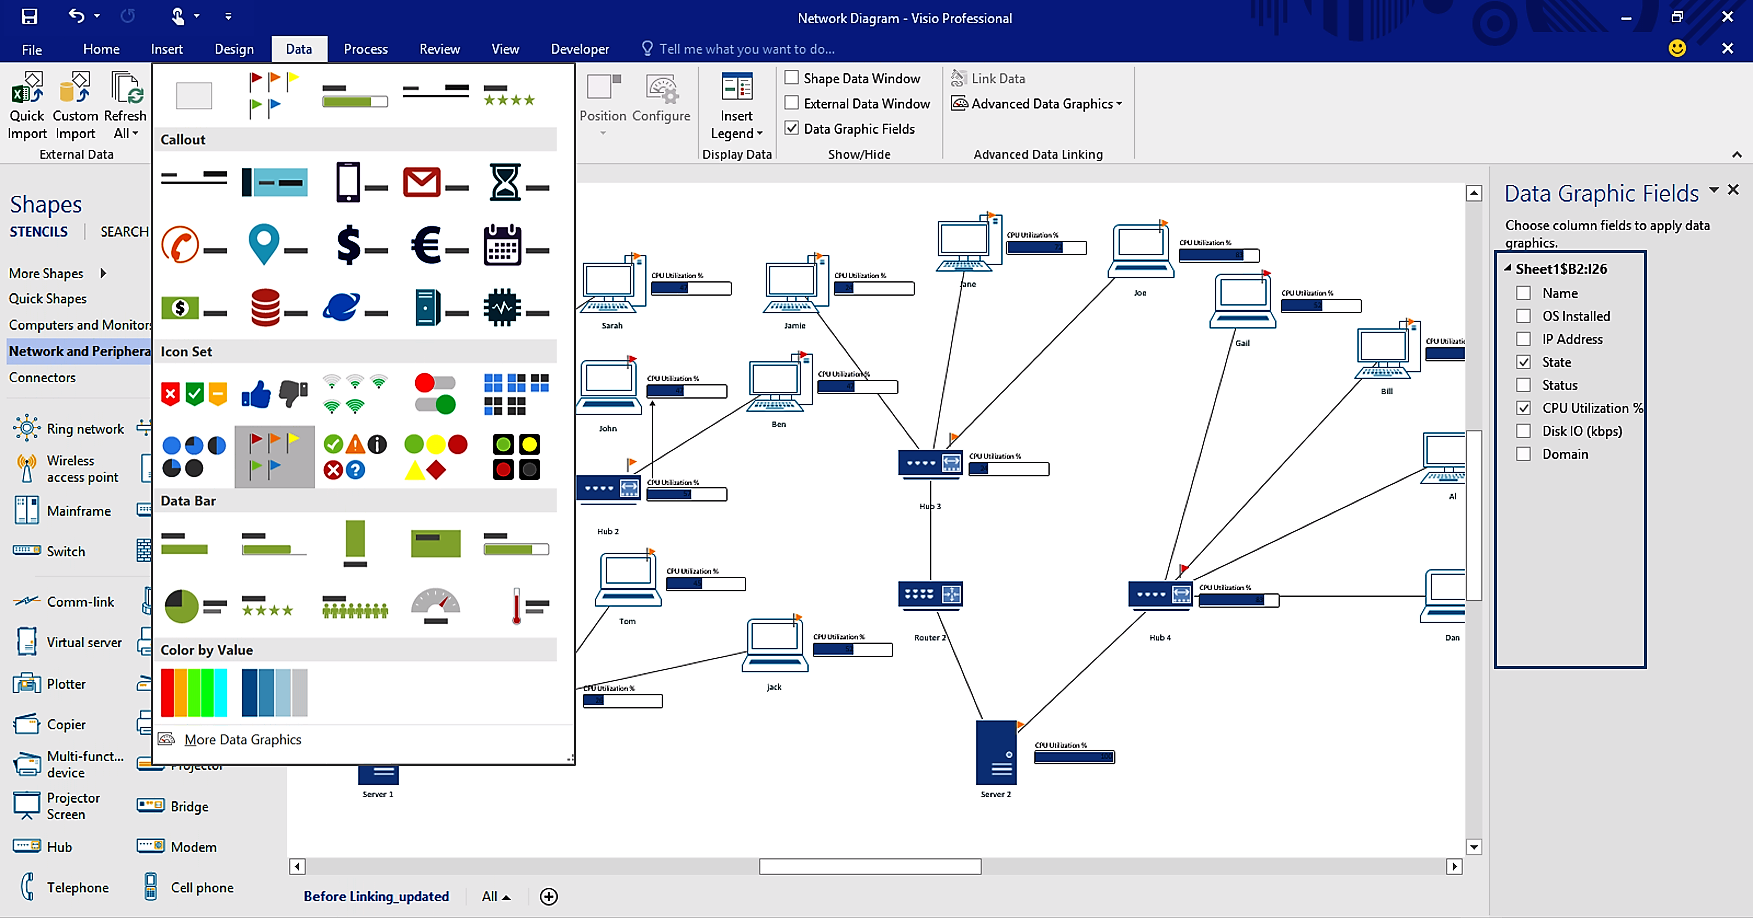 Microsoft Office Visio Download Office Visio Is A Powerful Program To Create Professional Looking Diagrams